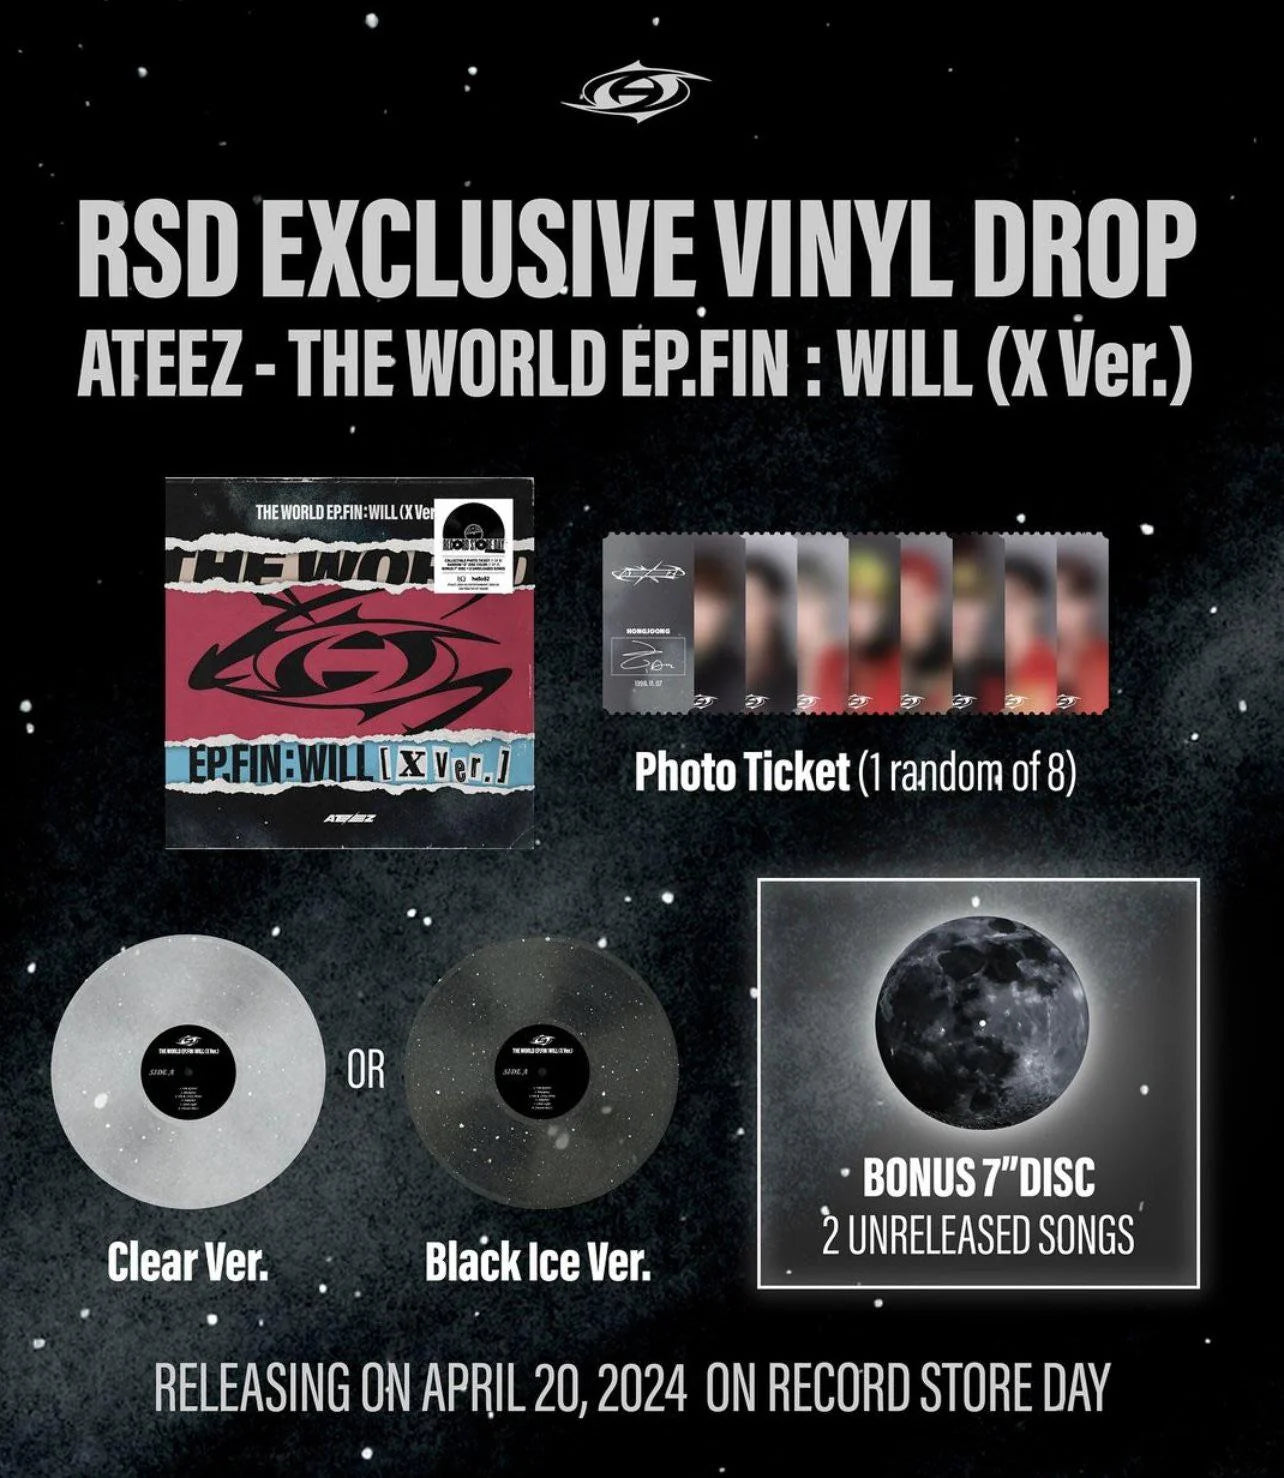 ATEEZ - THE WORLD EP.FIN : WILL (LIMITED GATEFOLD EXCLUSIVE VINYL)